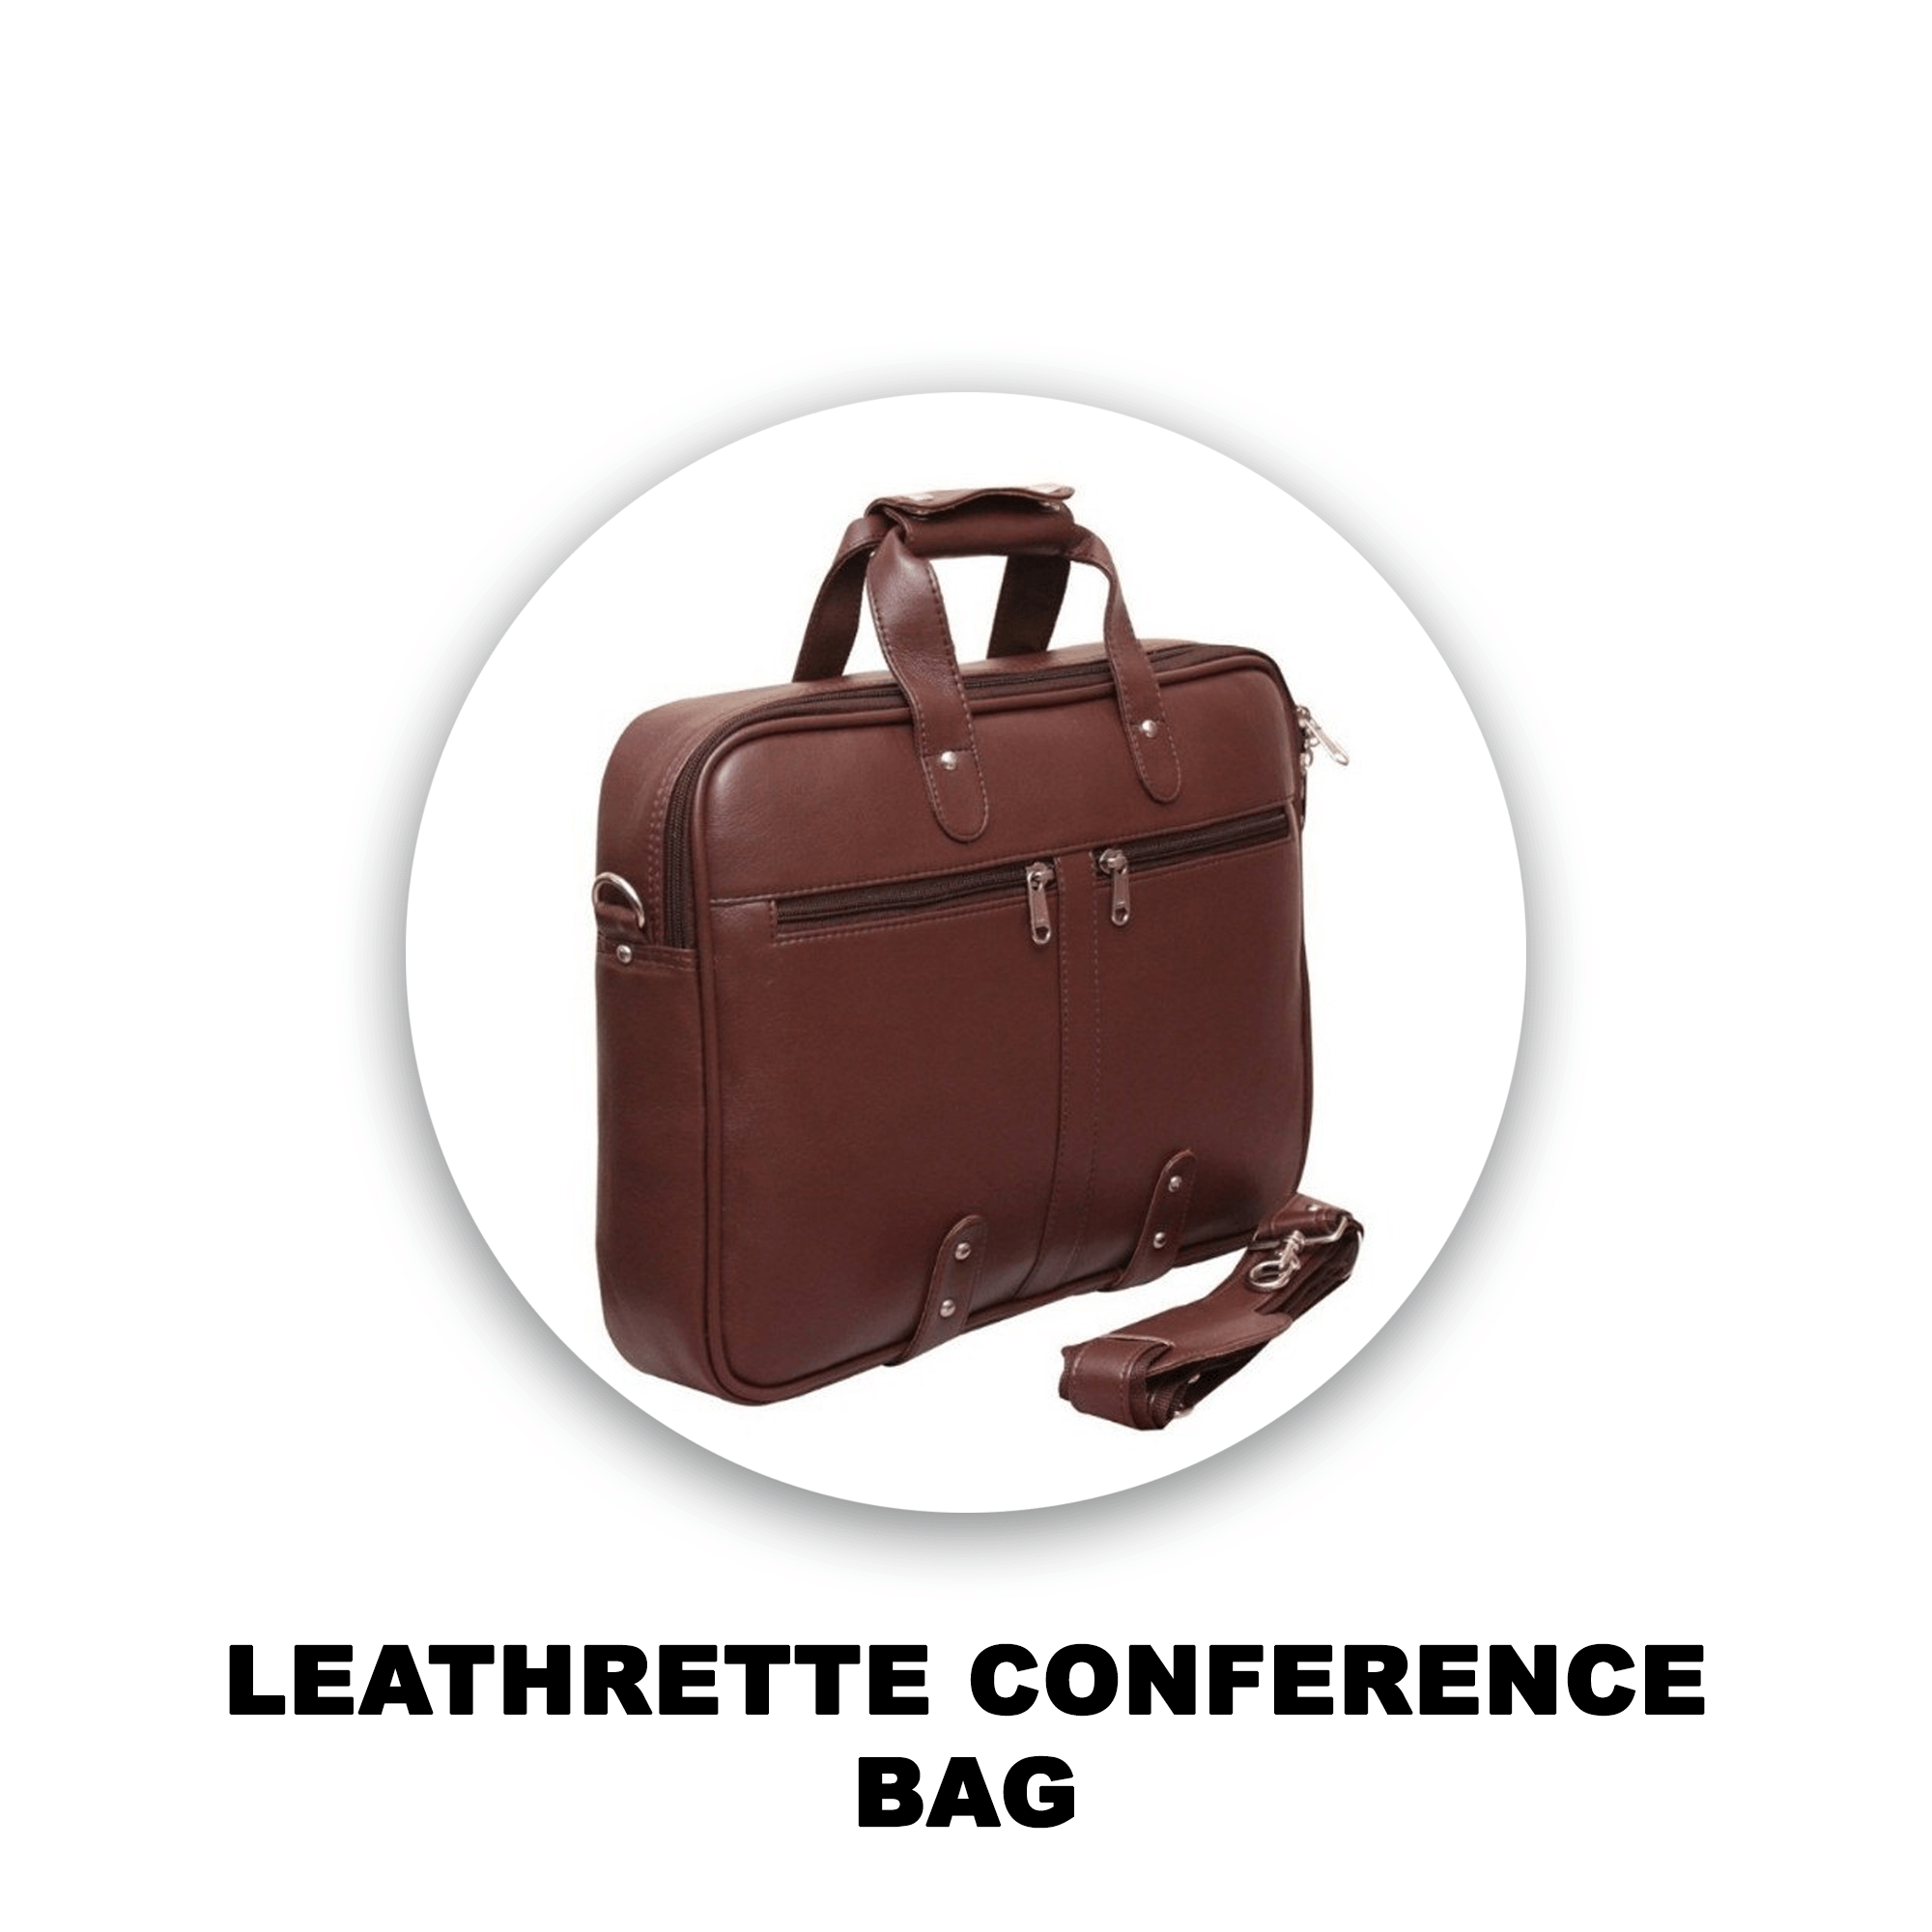 Liven up your conference bags | The Planner